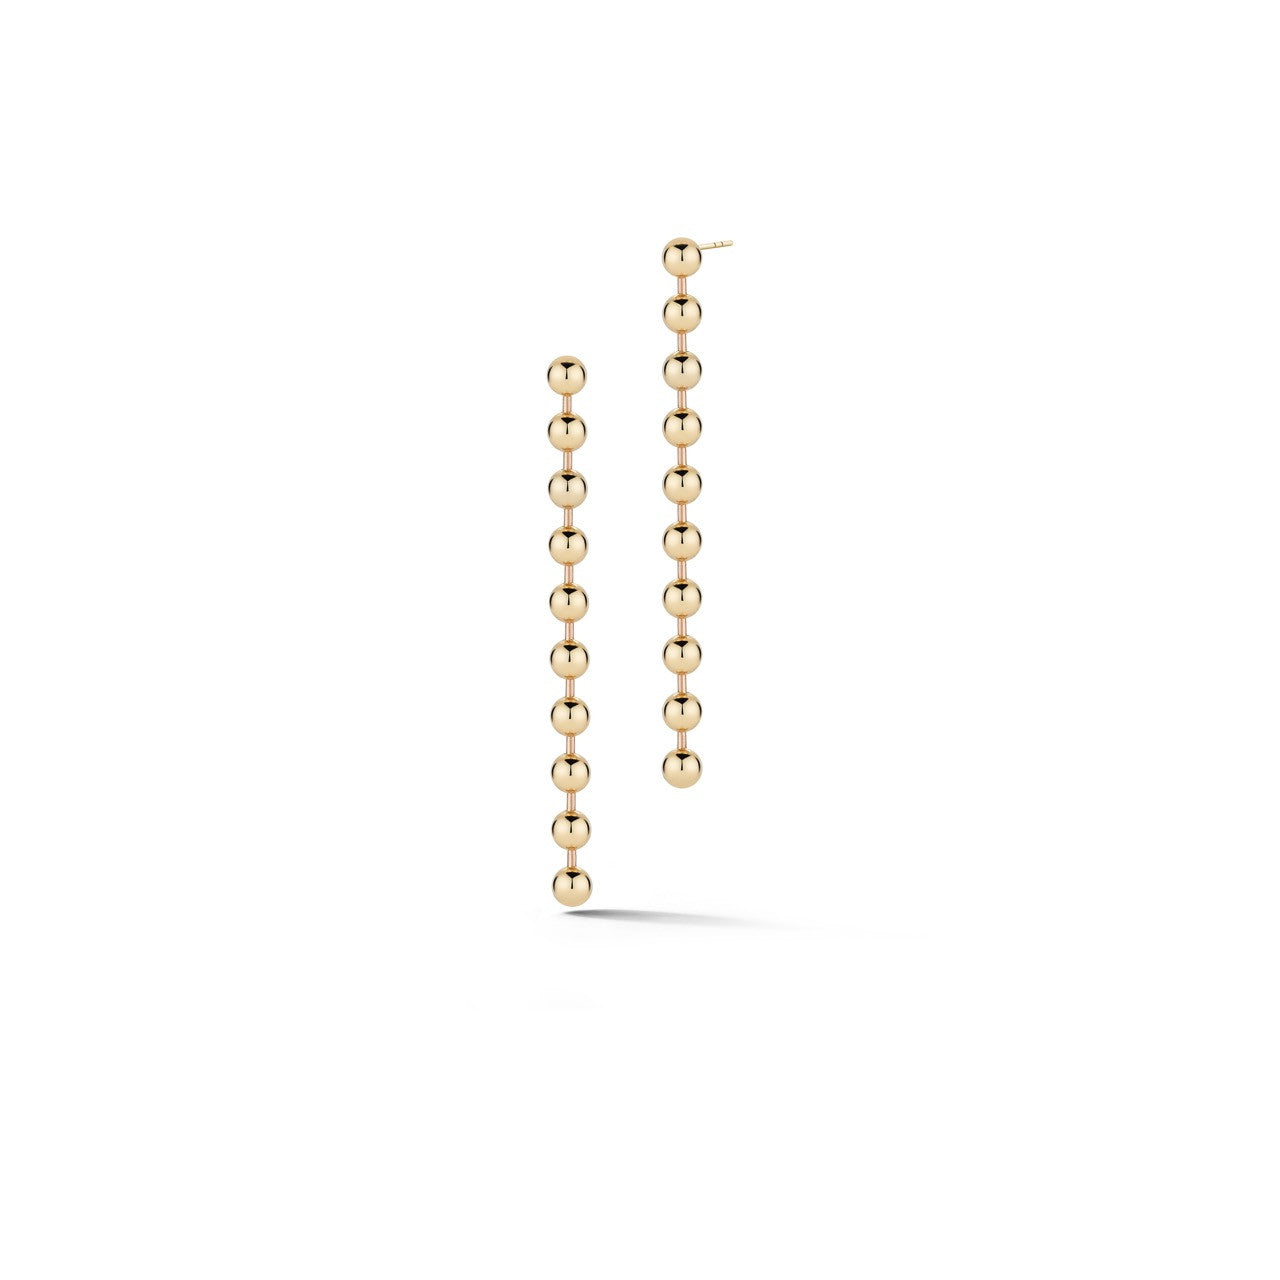 light day to night ball chain earrings in 14k gold by finn by candice pool neistat